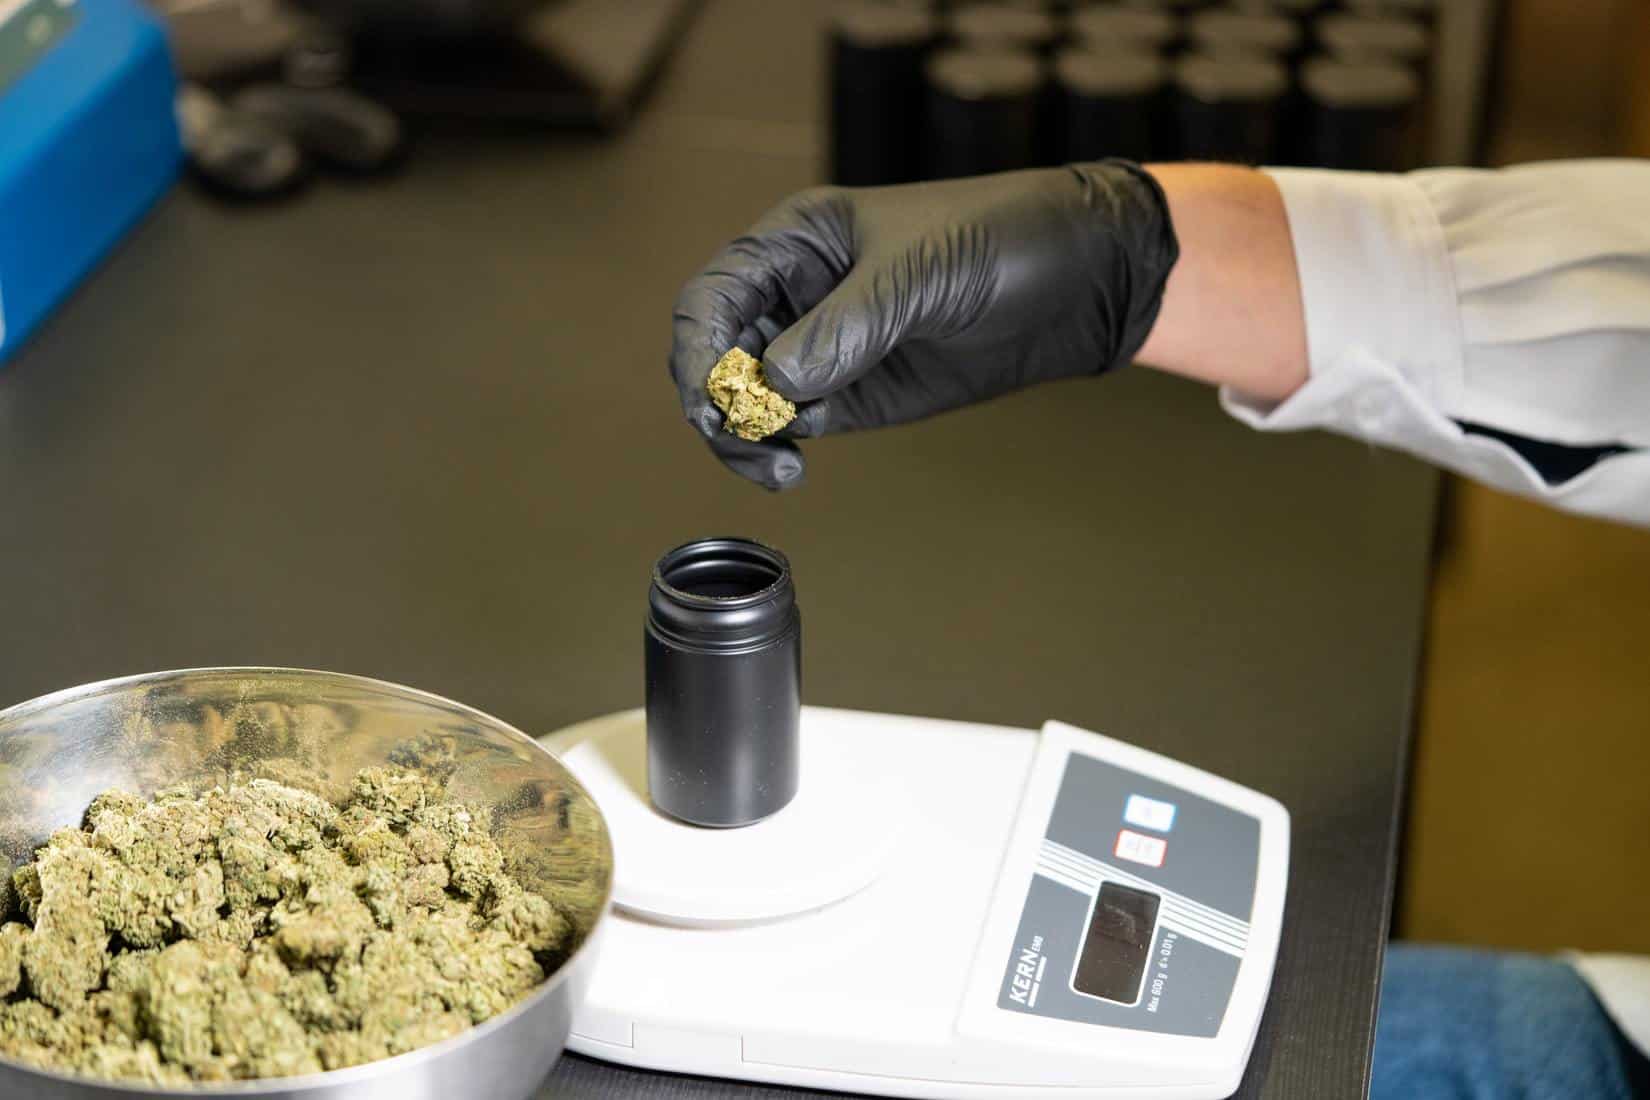 Legalized adult use cannabis being weighed by hand with black glove.